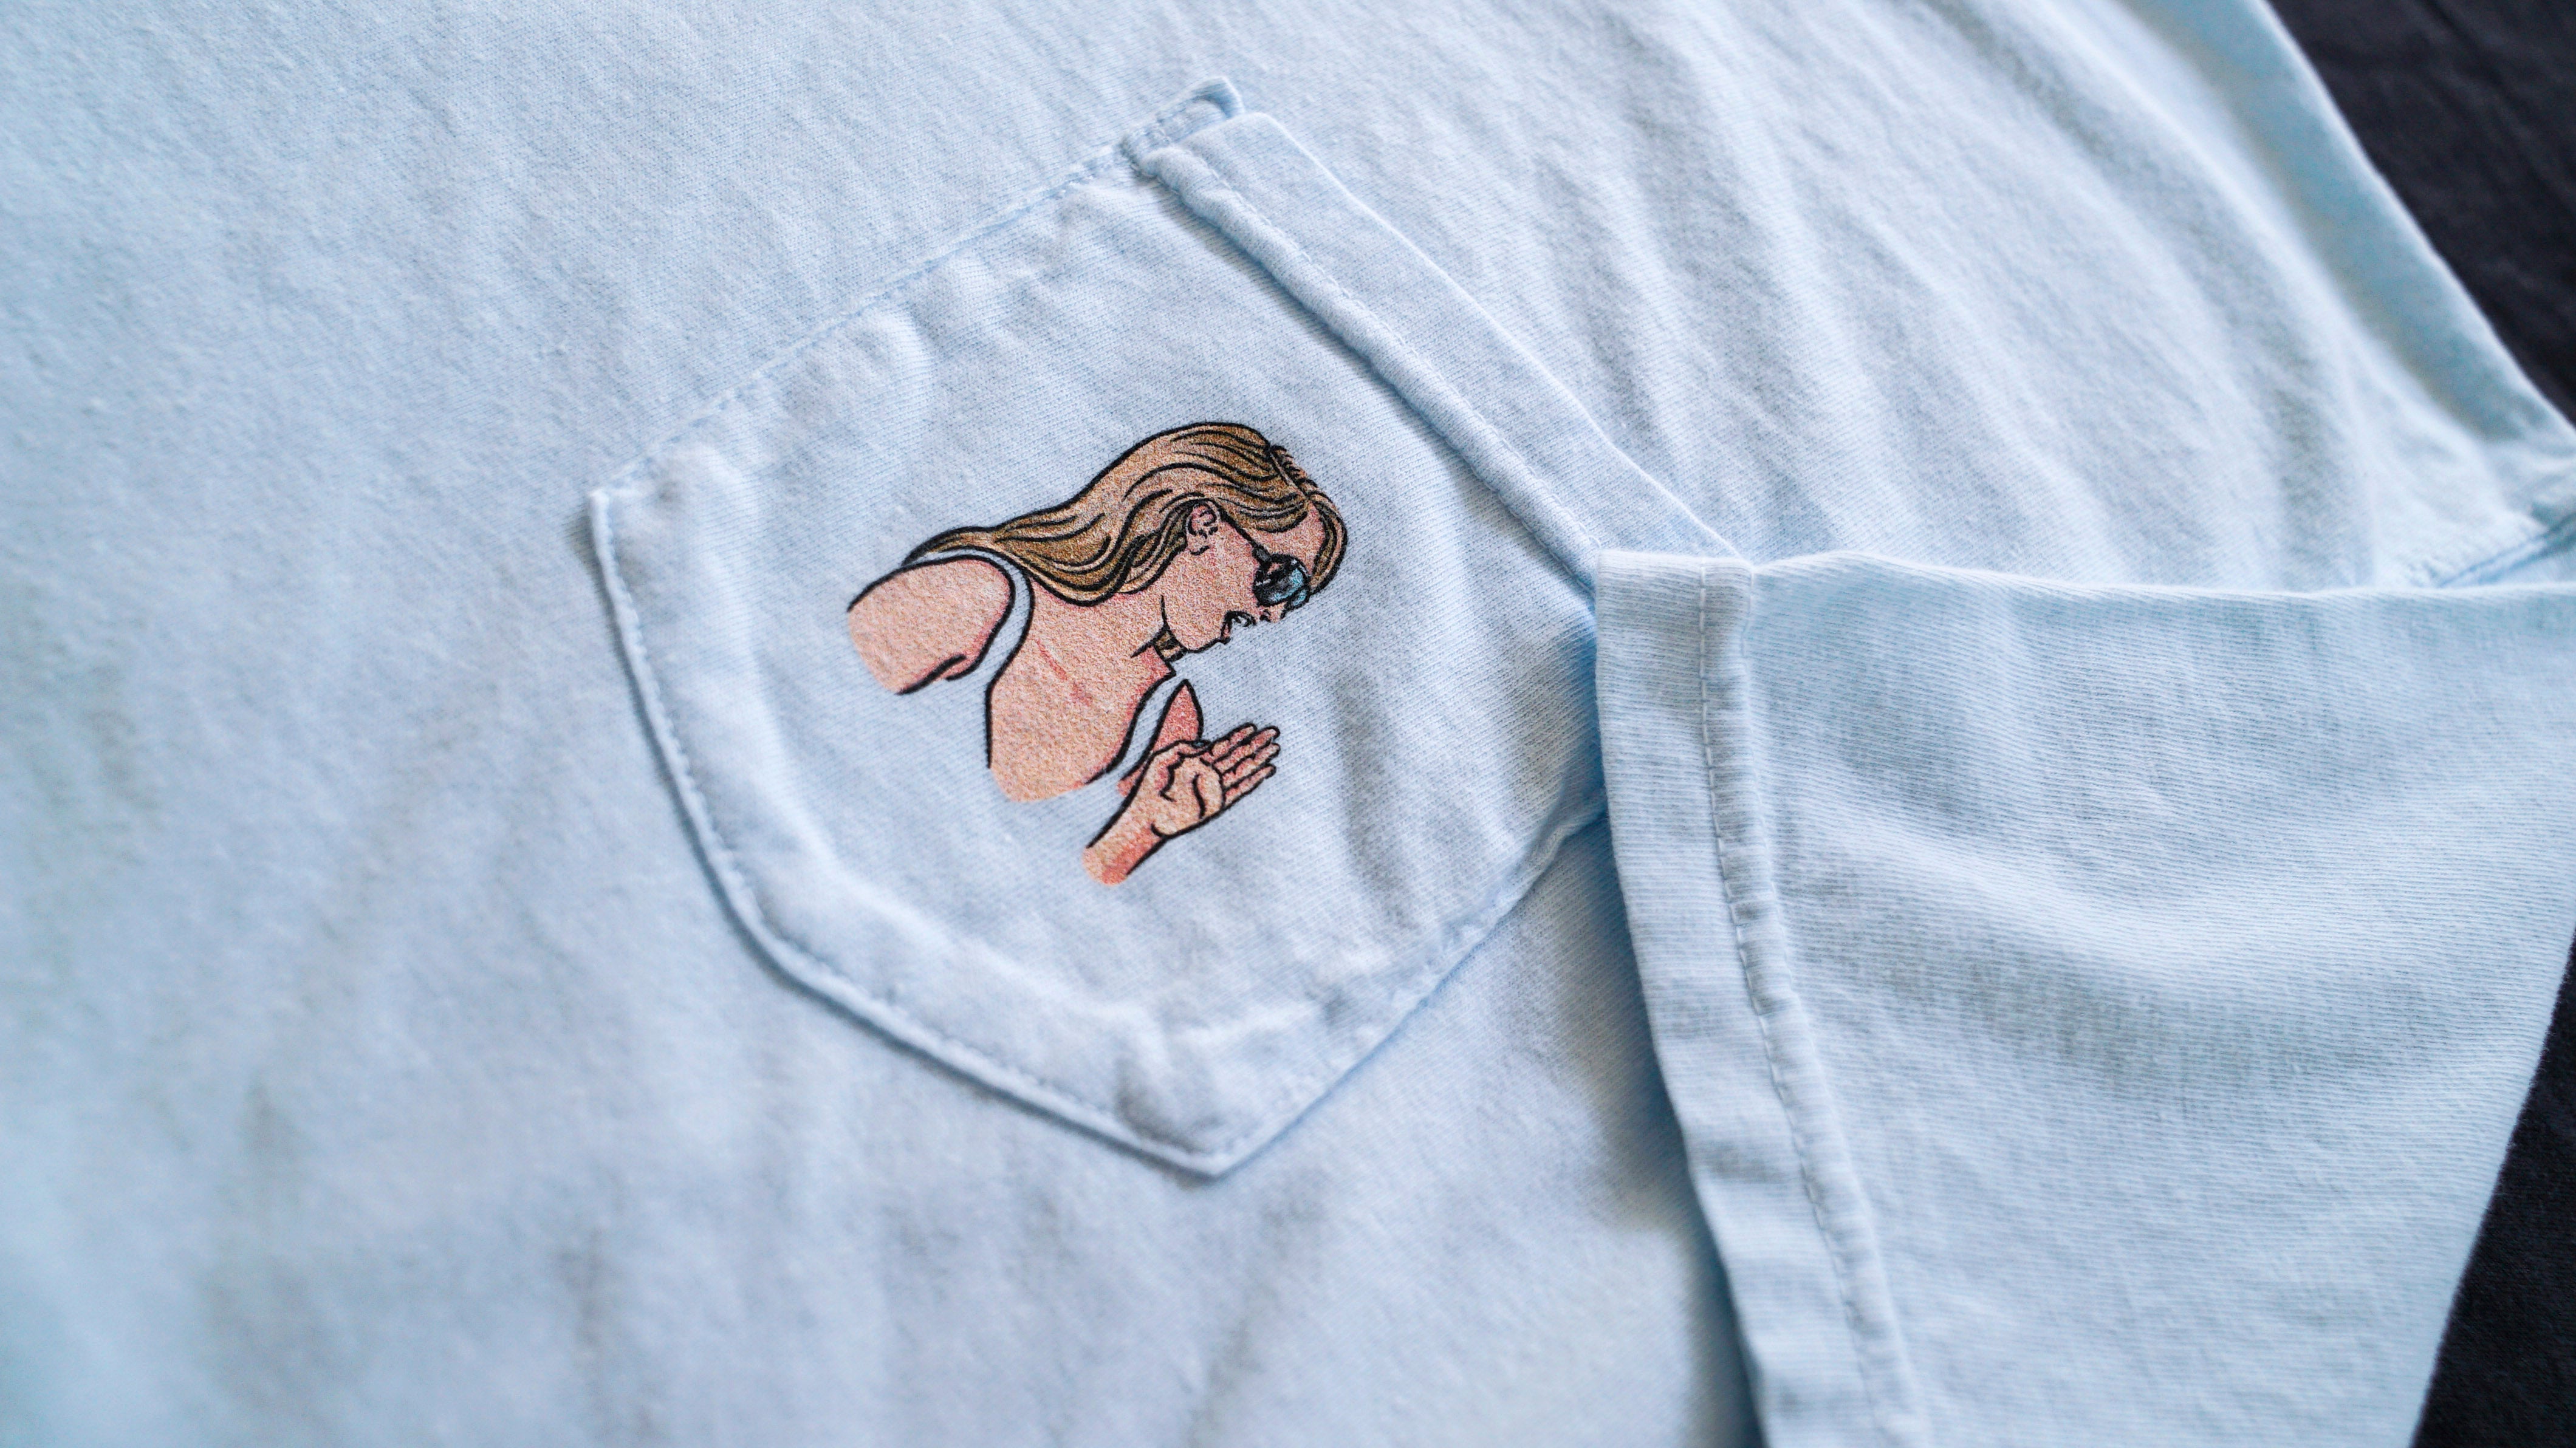 "I DON'T KNOW YOU, AND I DON'T WANT TO" POCKET TEE